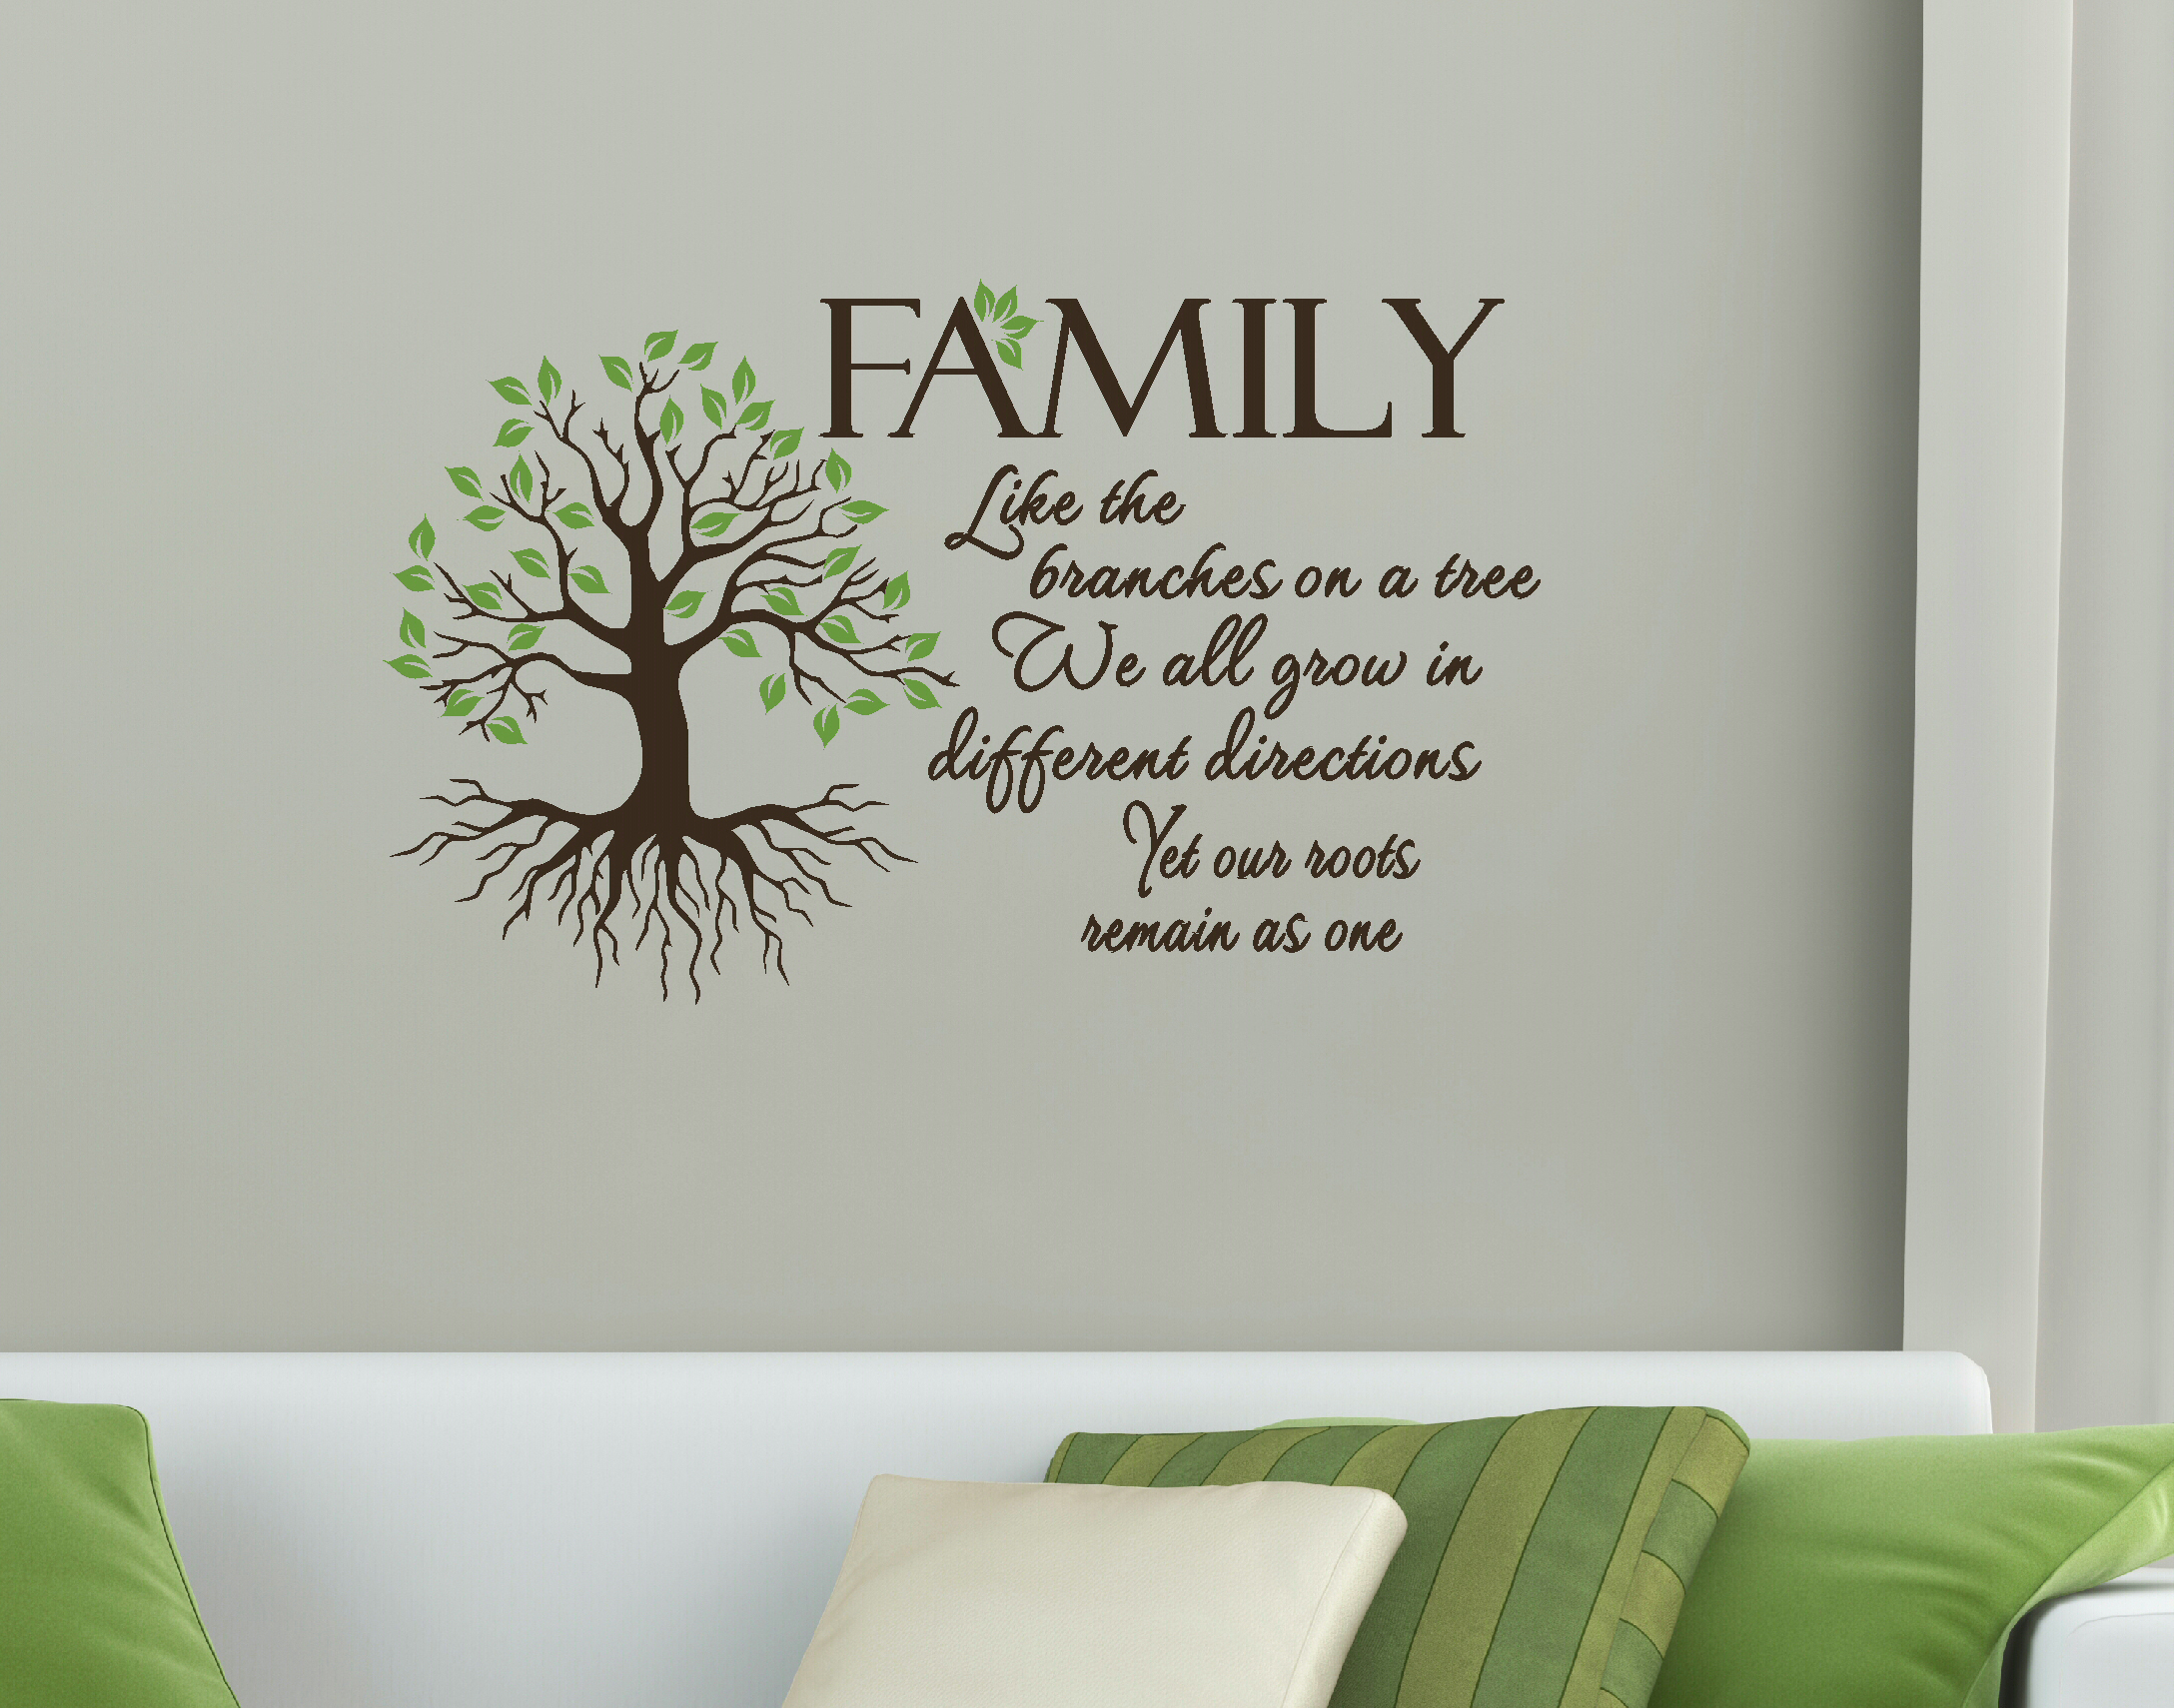 Vinyl Wall Saying Quote Words Decal Vinyl Quote Me Together we Make a Family